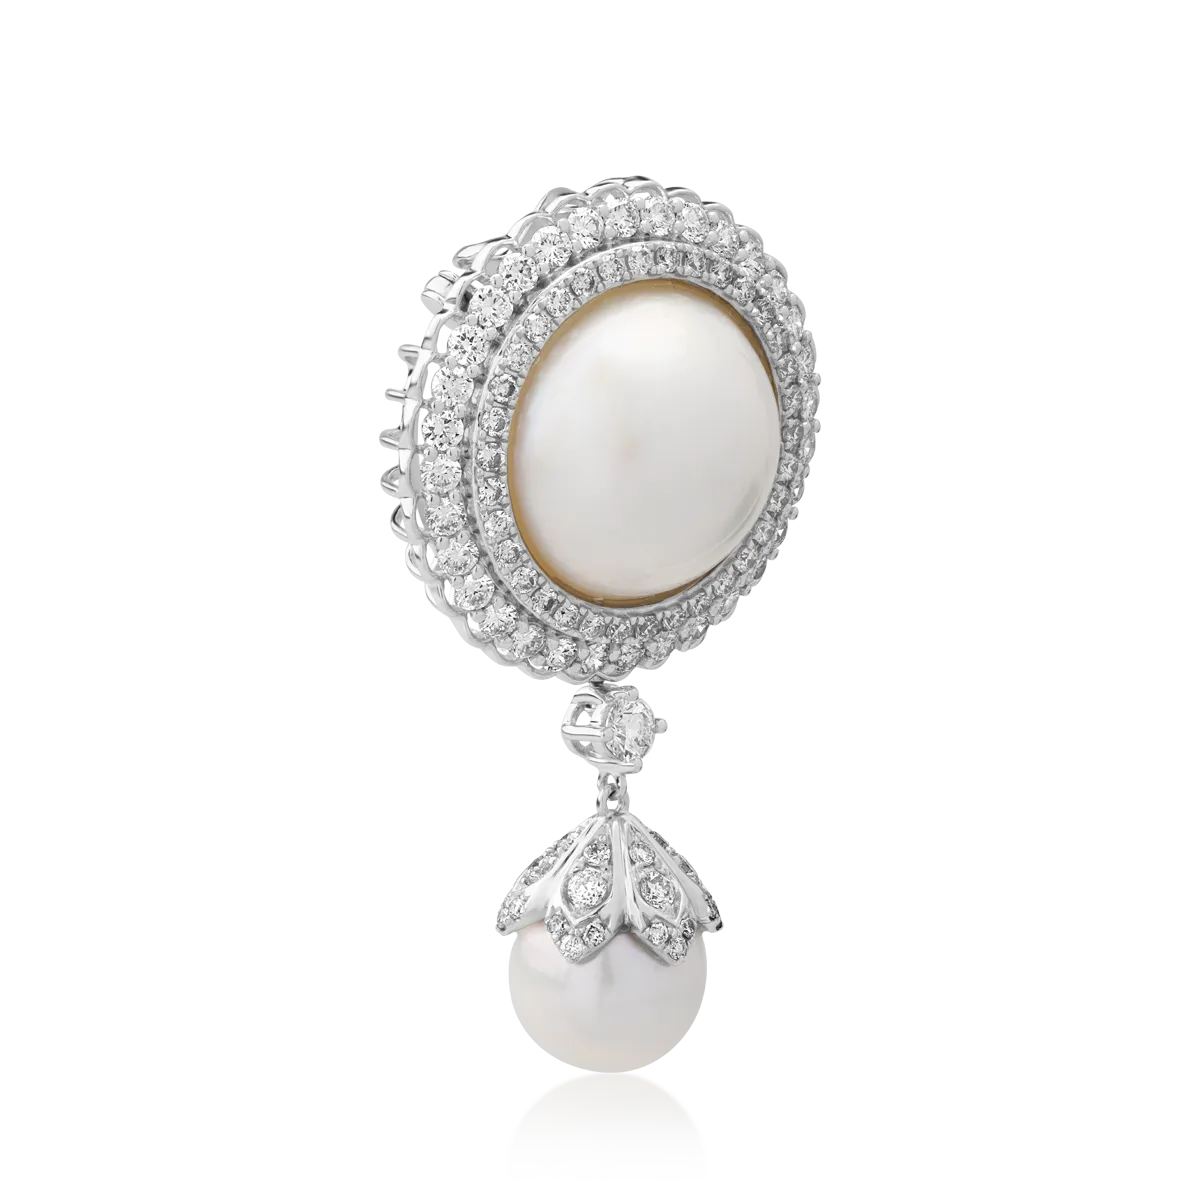 18K white gold brooch with 17.44ct fresh water pearls